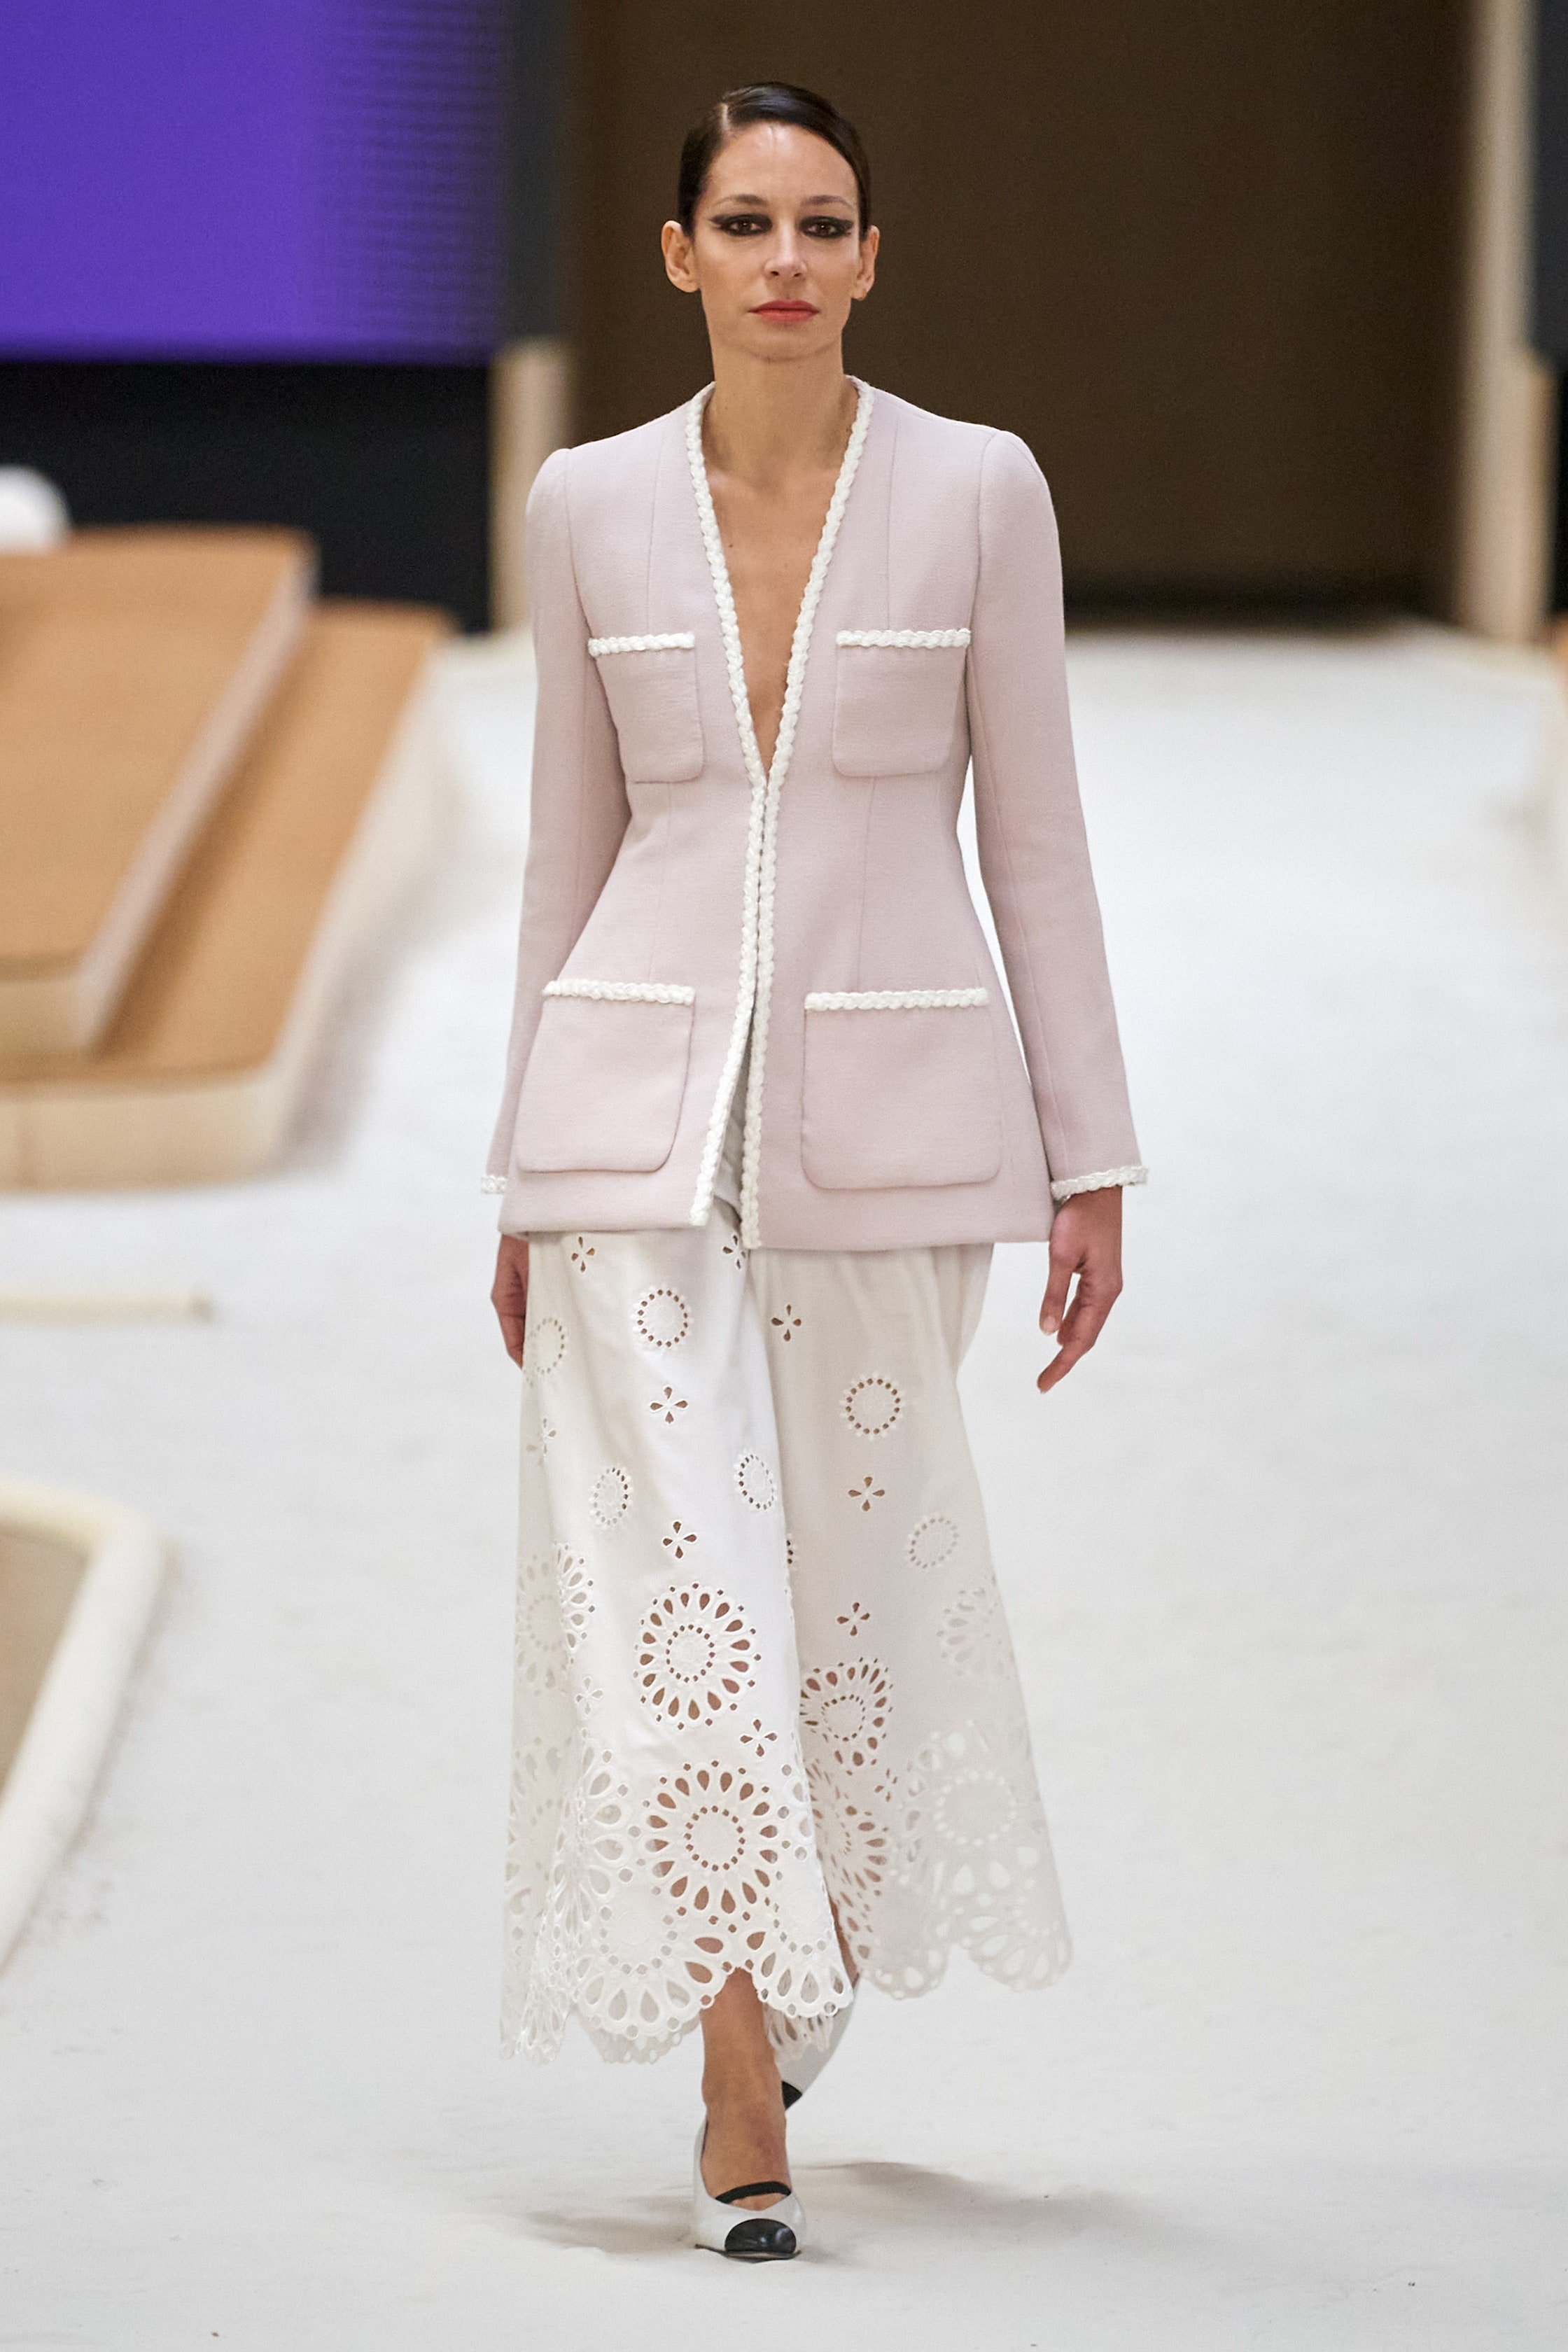 00005-Chanel-Couture-Spring-22-credit-gorunway.jpeg